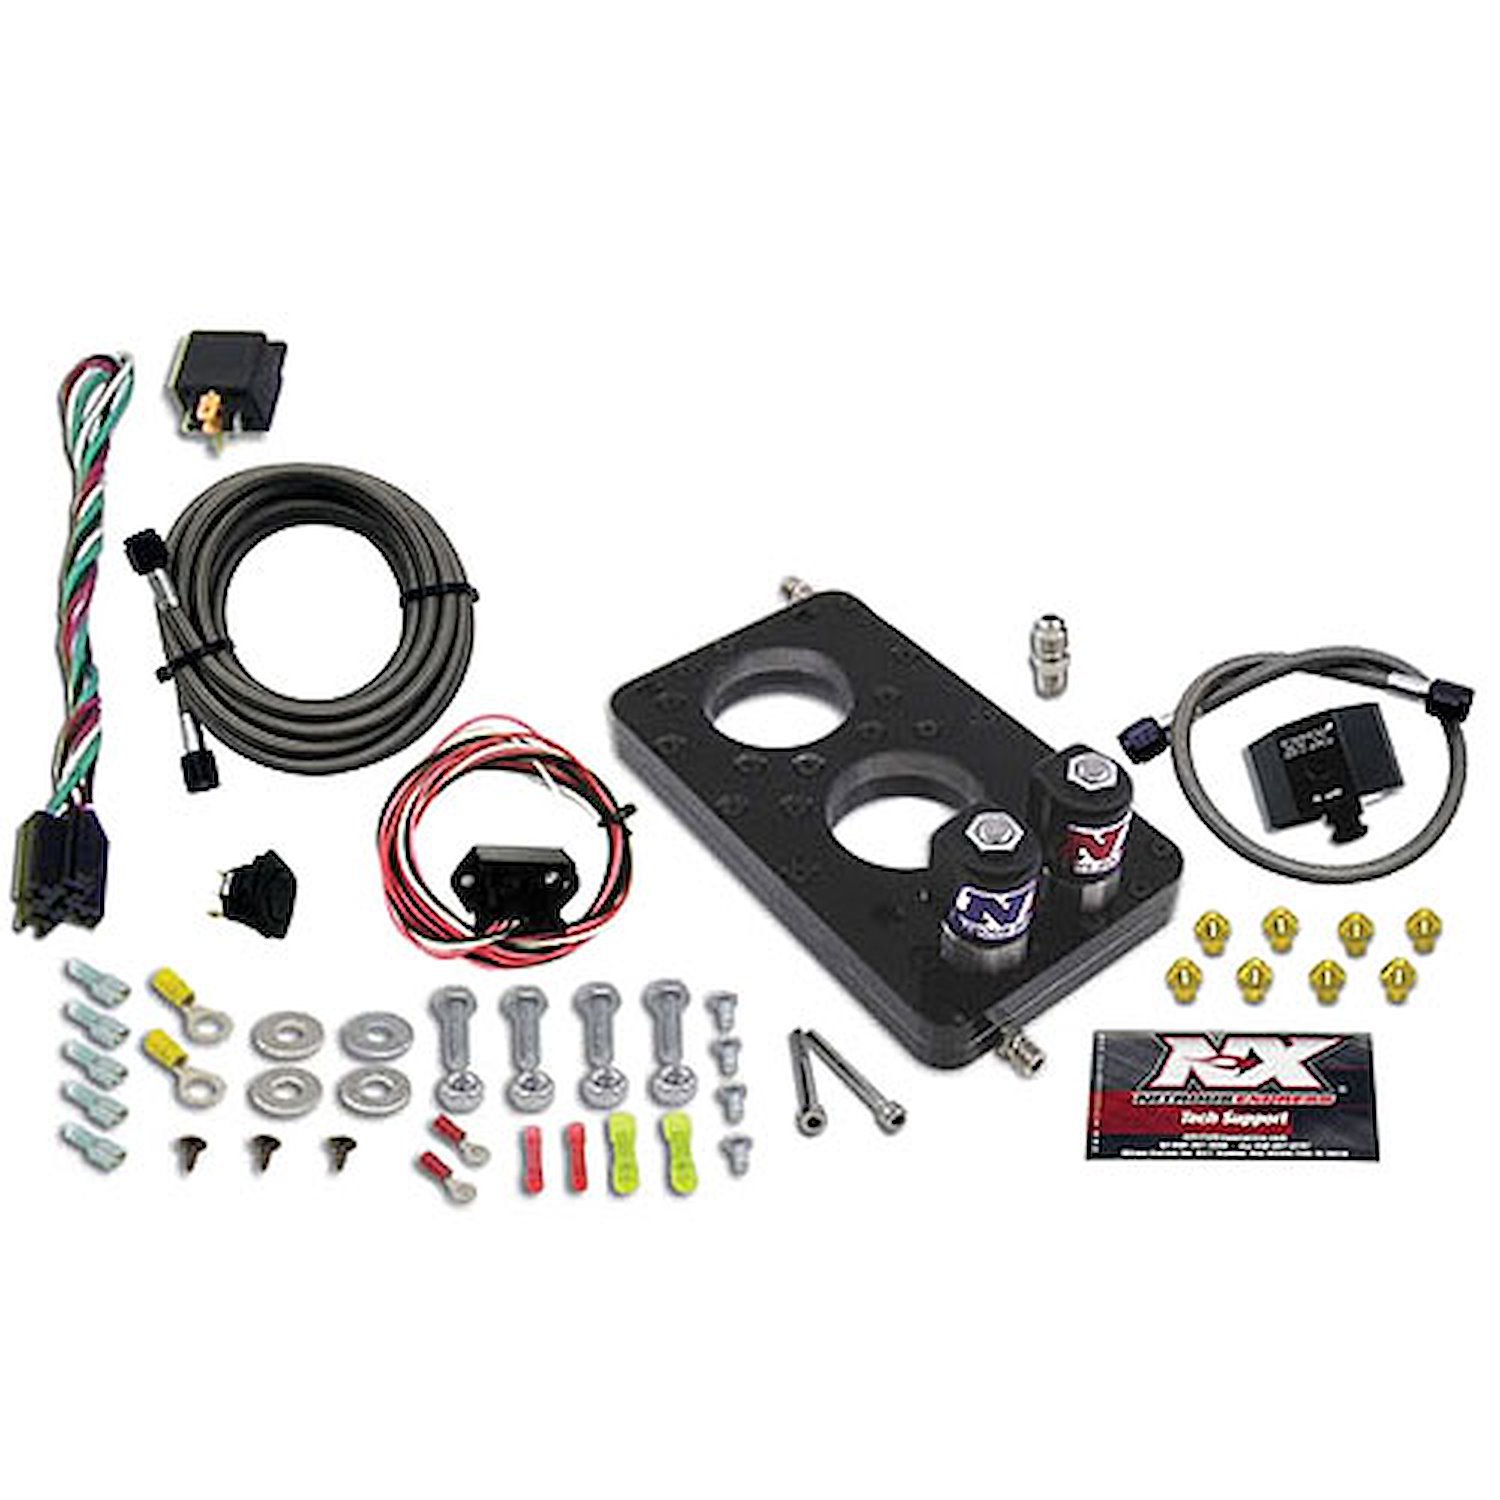 Ford 4.6L 3-Valve Nitrous Plate System 2005-2010 Mustang GT & Fords w/4.6L 3V